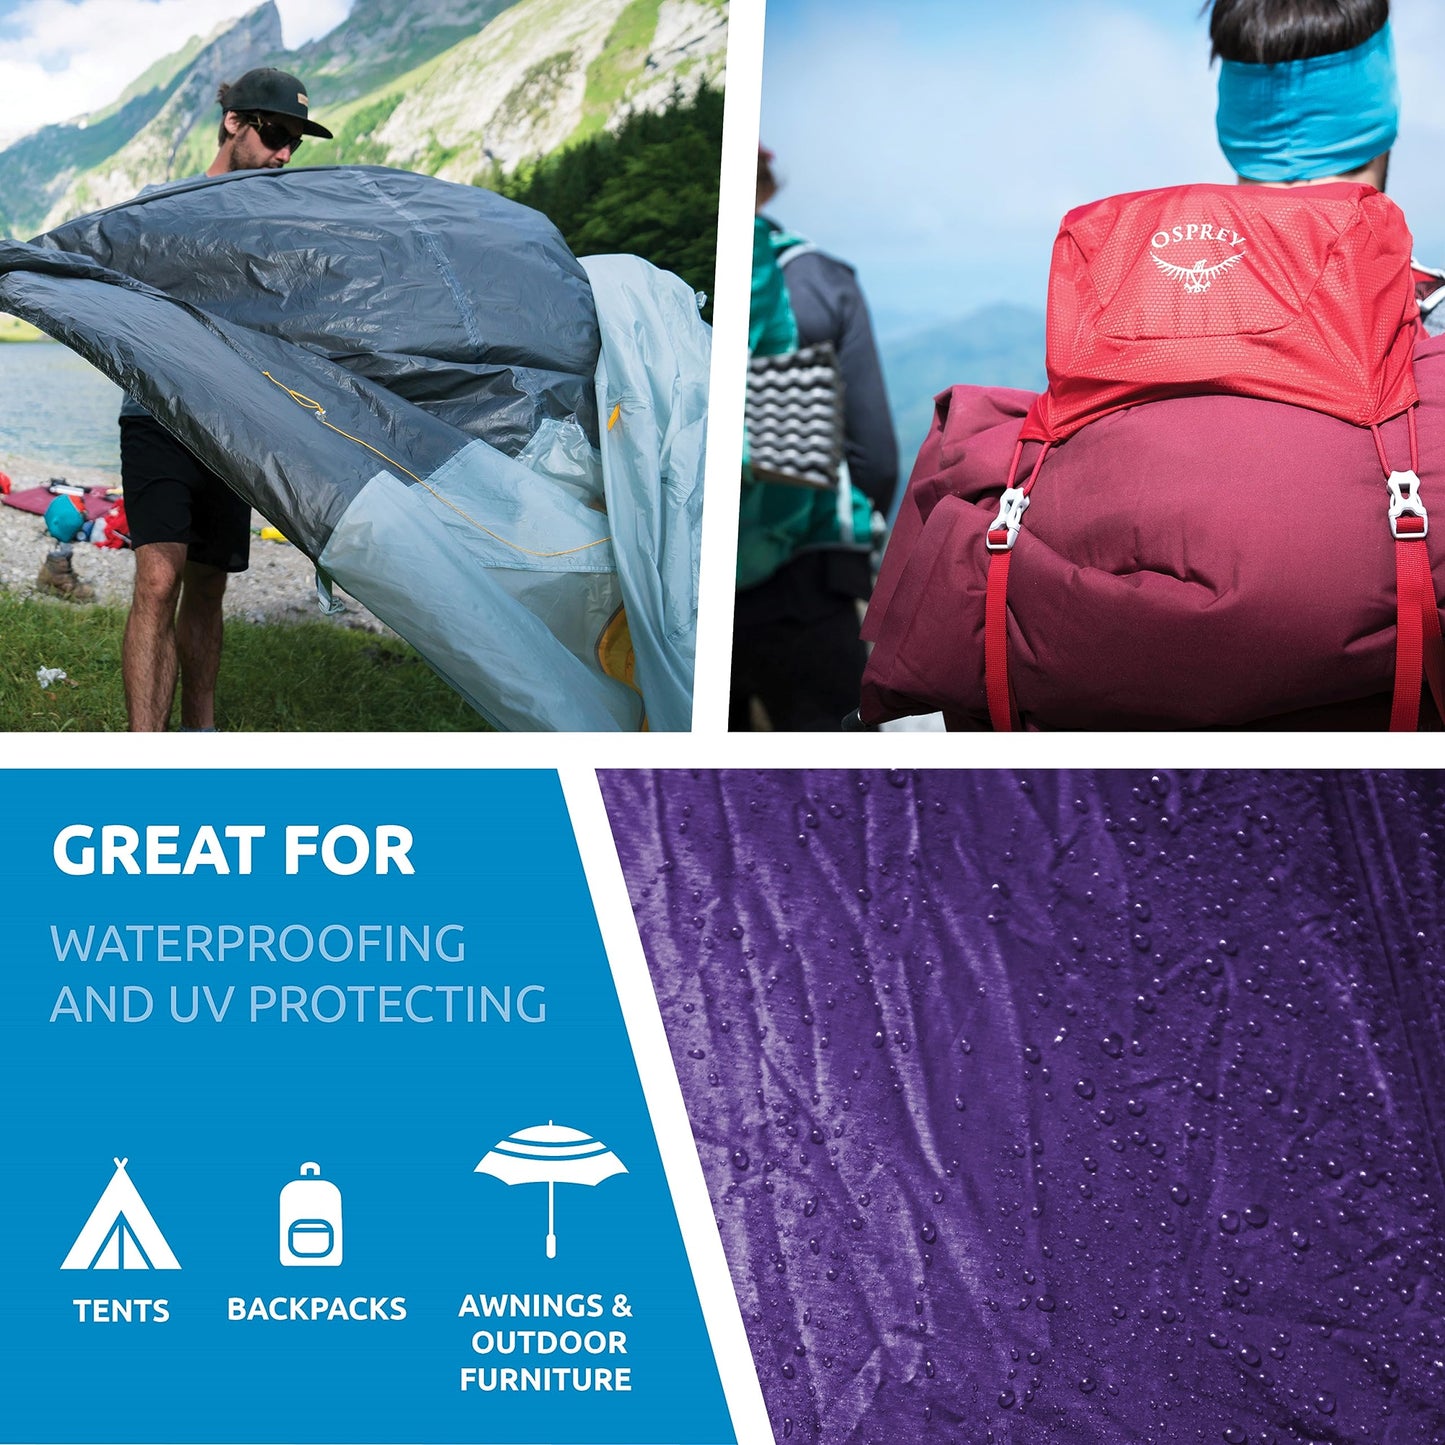 Nikwax Tent & Gear, Tent & Gear Solarproof, 500ml, Spray Waterproofing and UV Protector, Rain Protector, Restores DWR Water Repellency on Outdoor Fabric, Rain Fly, Canvas, Backpacks